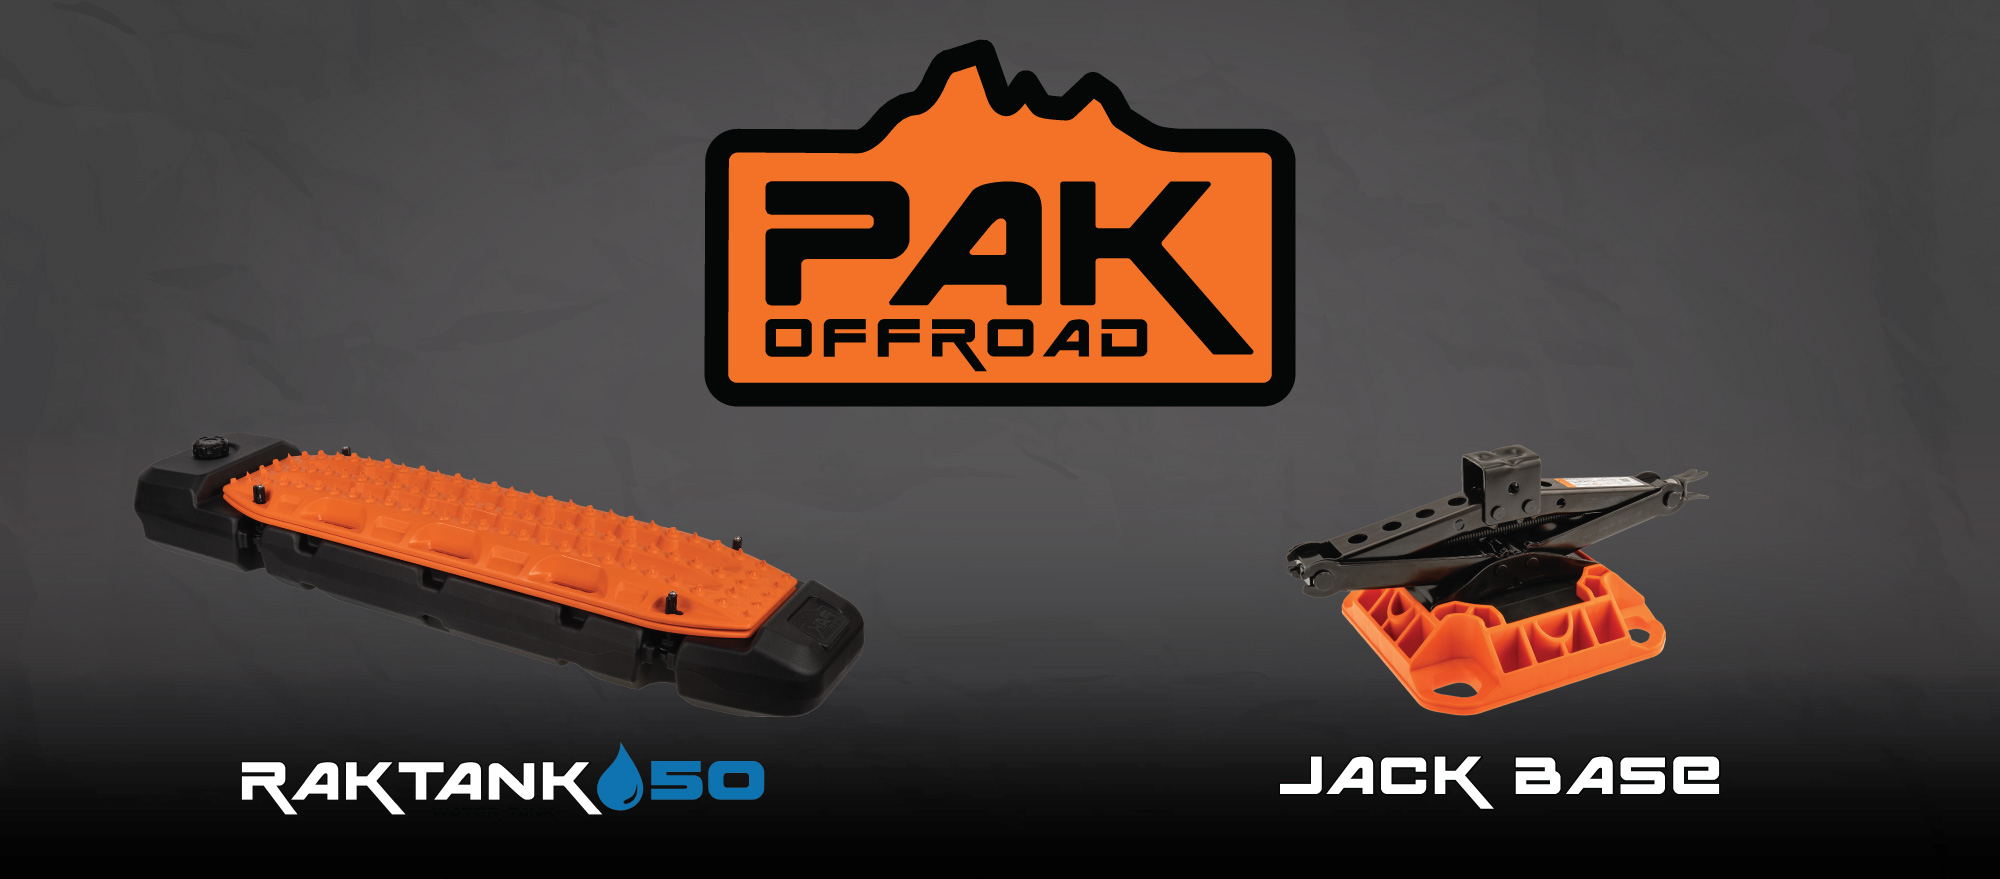 PAK Offroad products